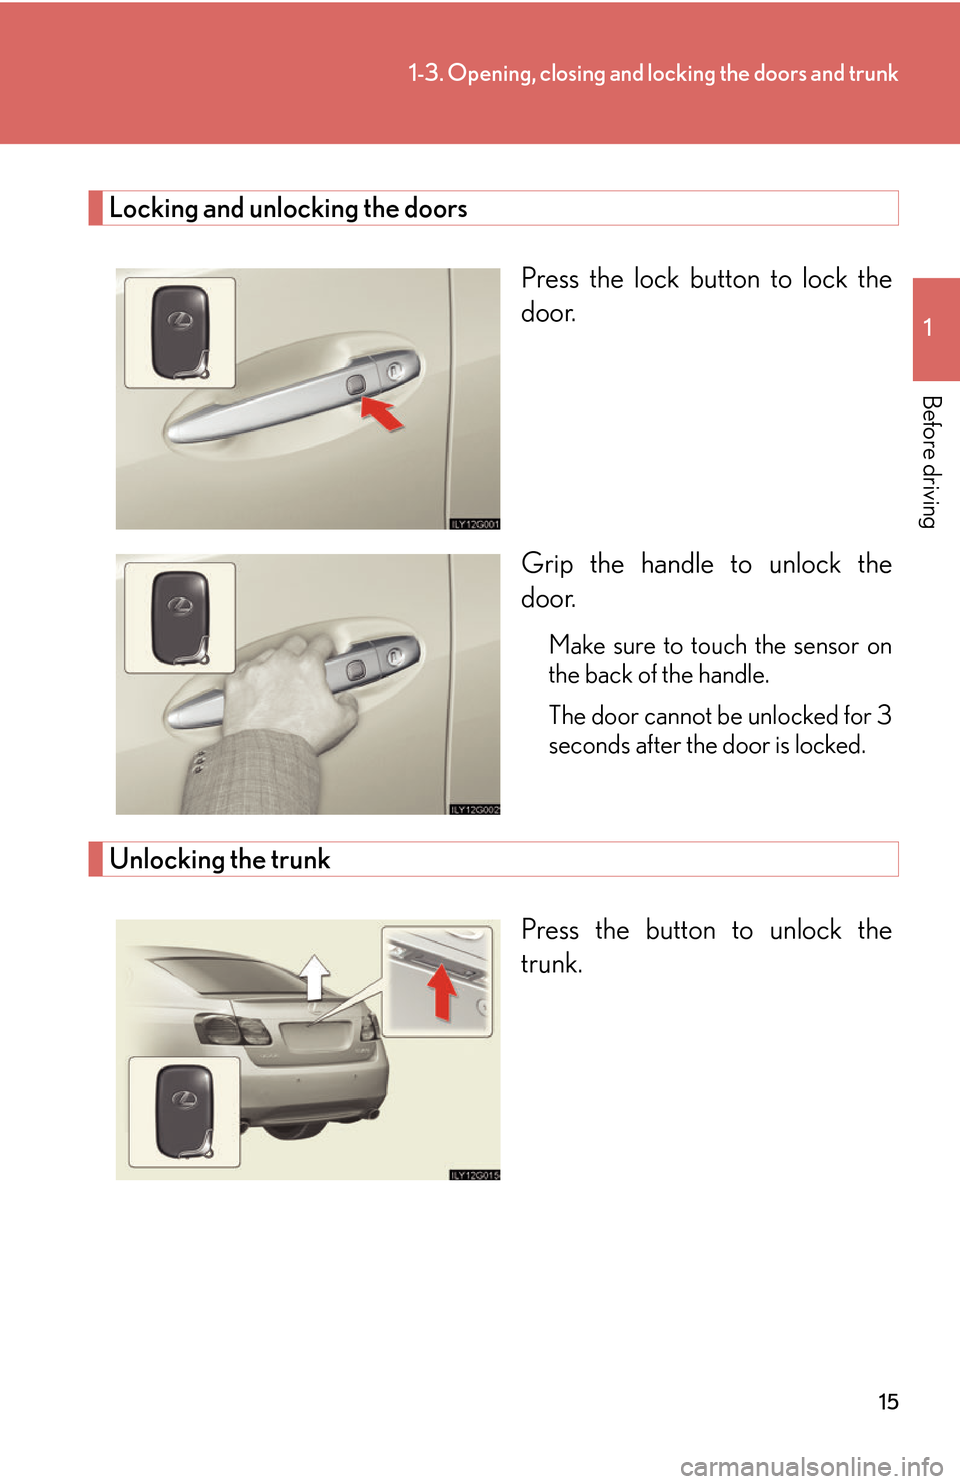 Lexus GS450h 2007  Do-it-yourself maintenance / LEXUS 2007 GS450H THROUGH JUNE 2006 PROD.  (OM30727U) Owners Guide 15
1-3. Opening, closing and locking the doors and trunk
1
Before driving
Locking and unlocking the doors
Press the lock button to lock the 
door.
Grip the handle to unlock the 
door
.
Make sure to to